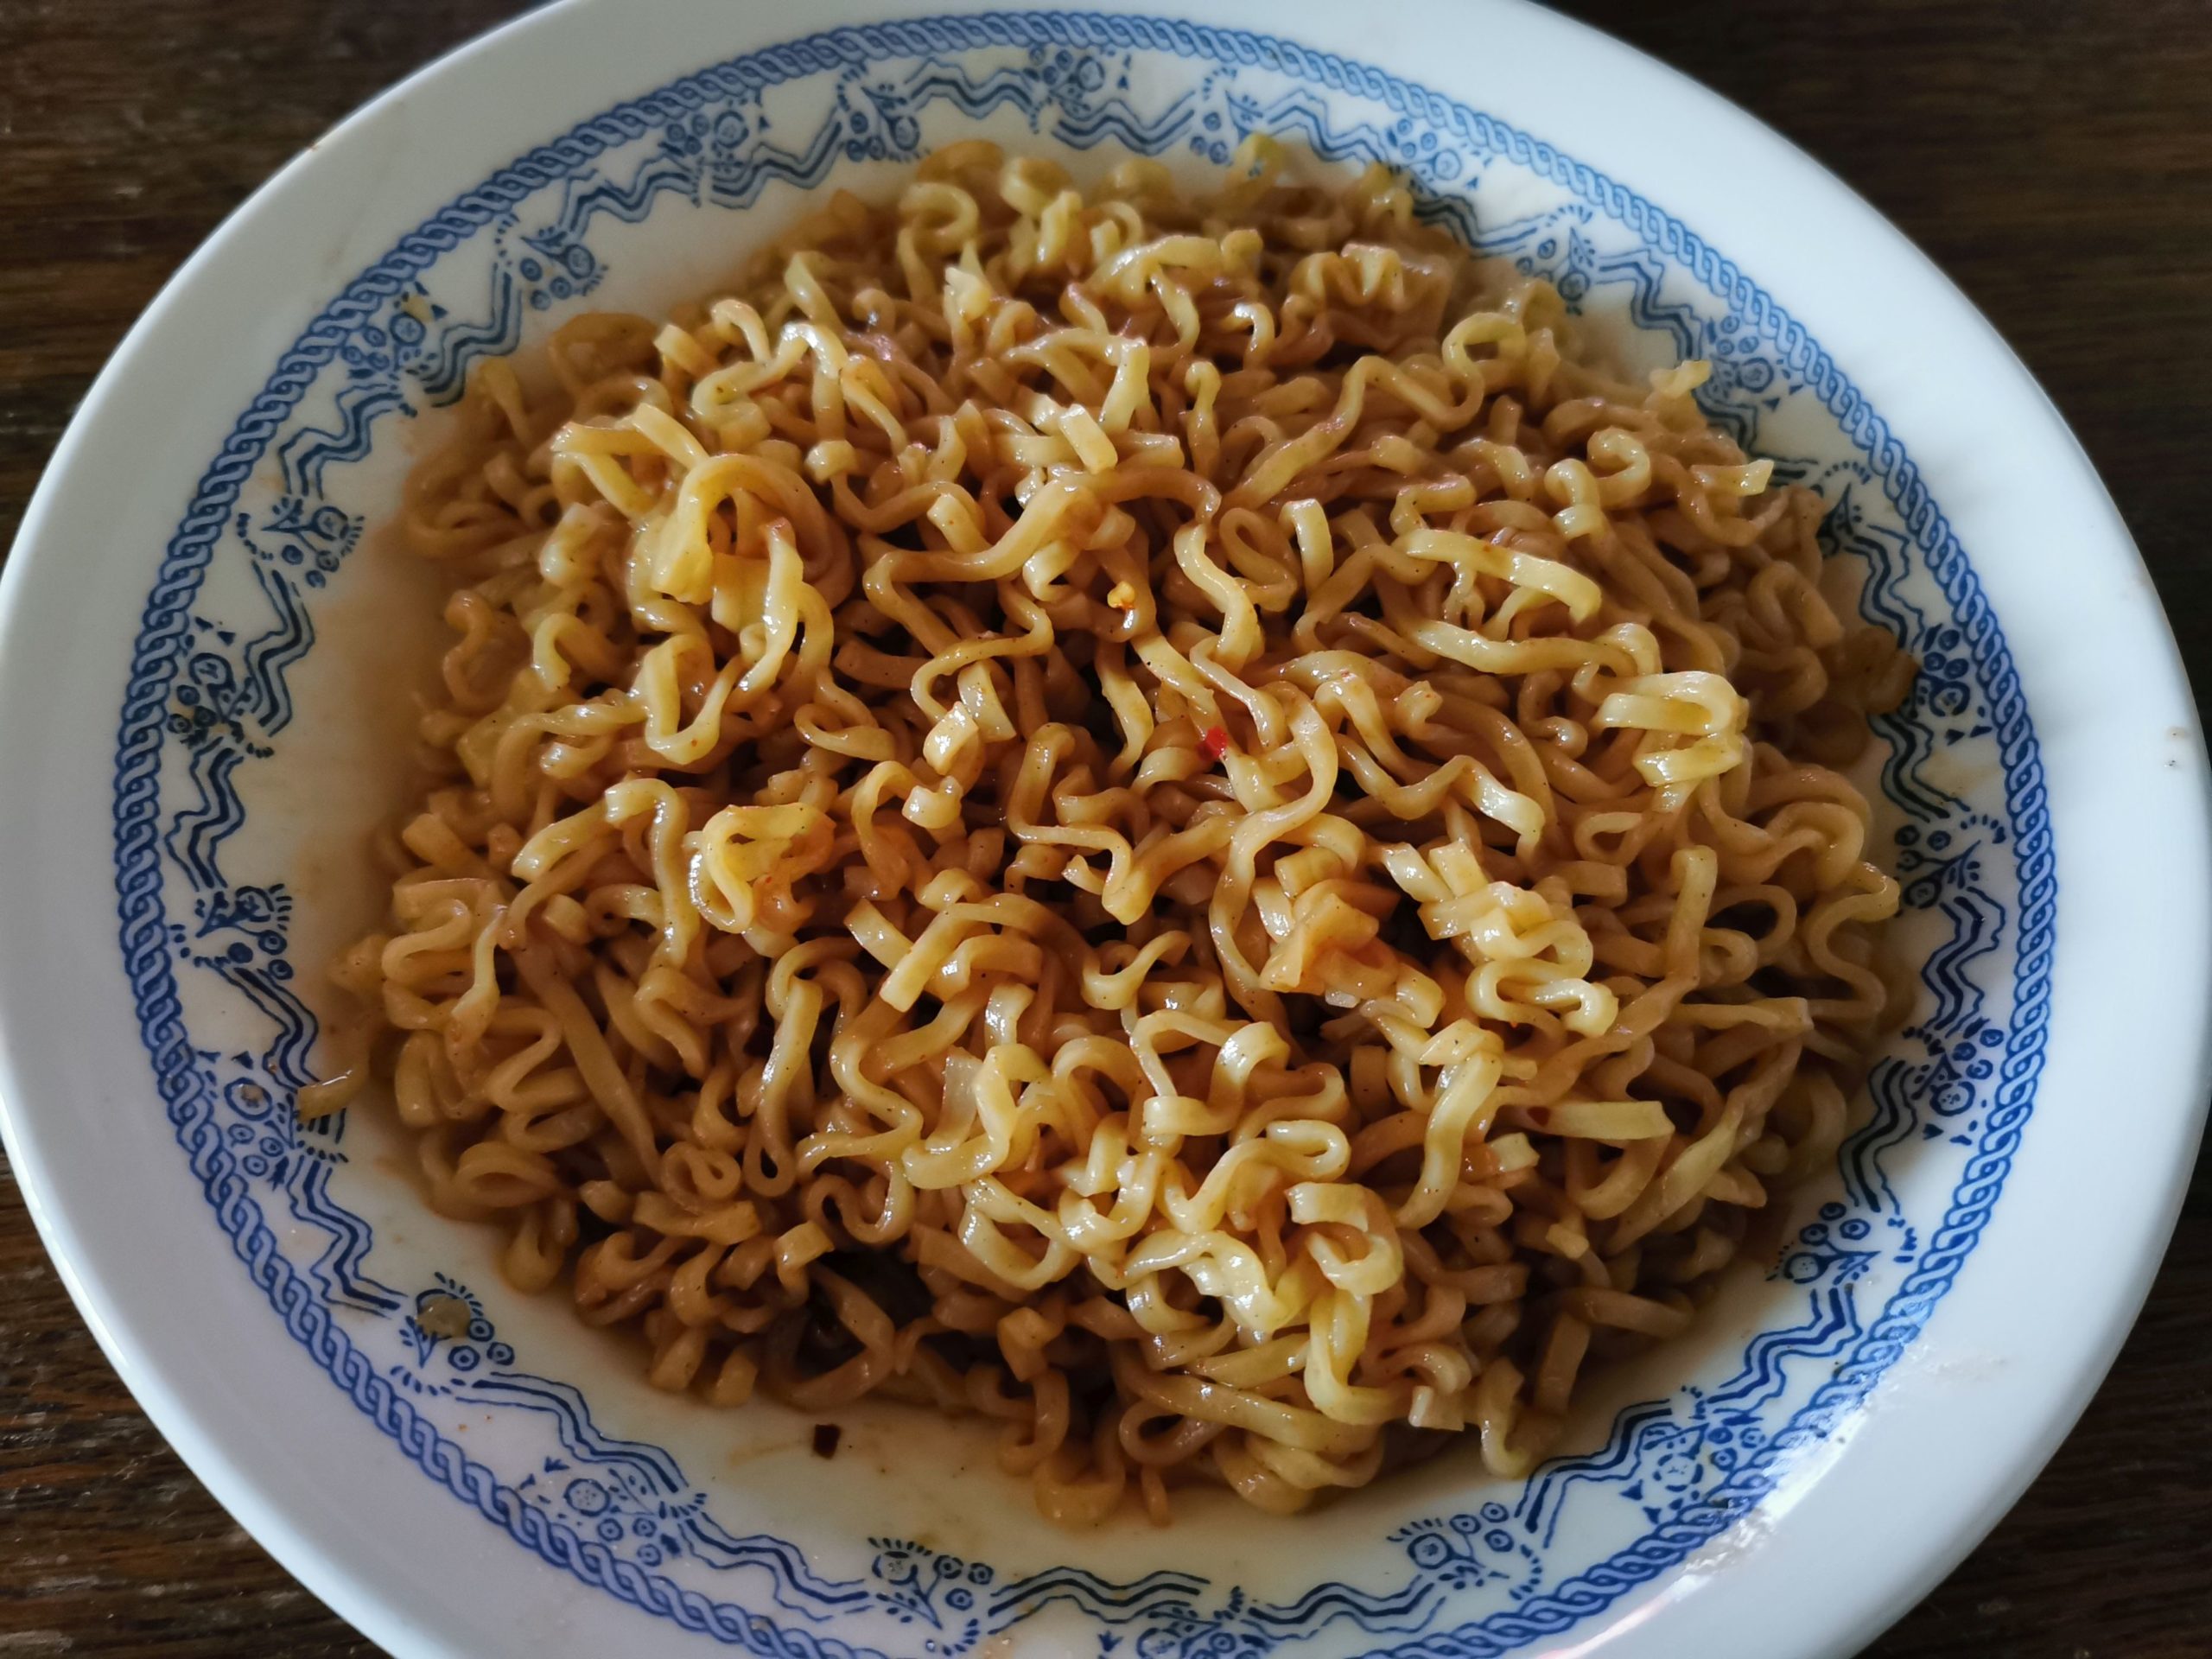 #1887: Lucky Me! "Instant Pancit Canton Extra Hot Chili Flavour"